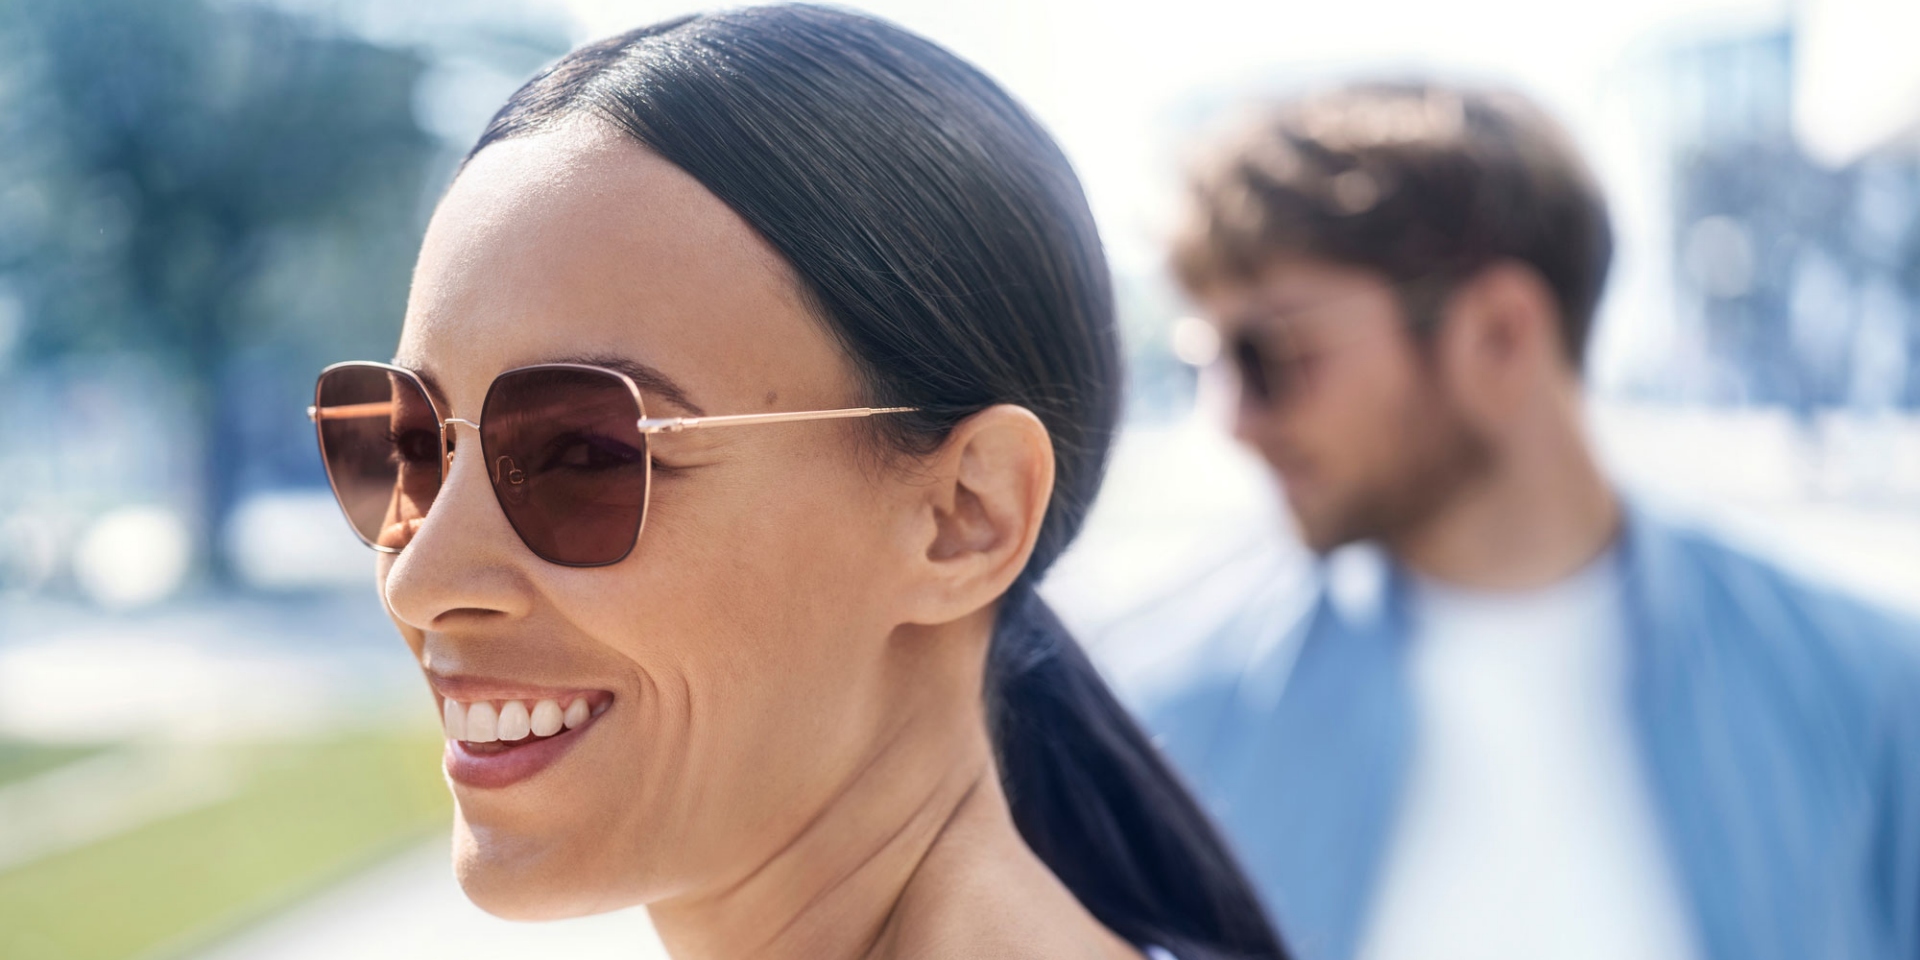 Front: smiling woman with sunglasses, background: a man with glasses